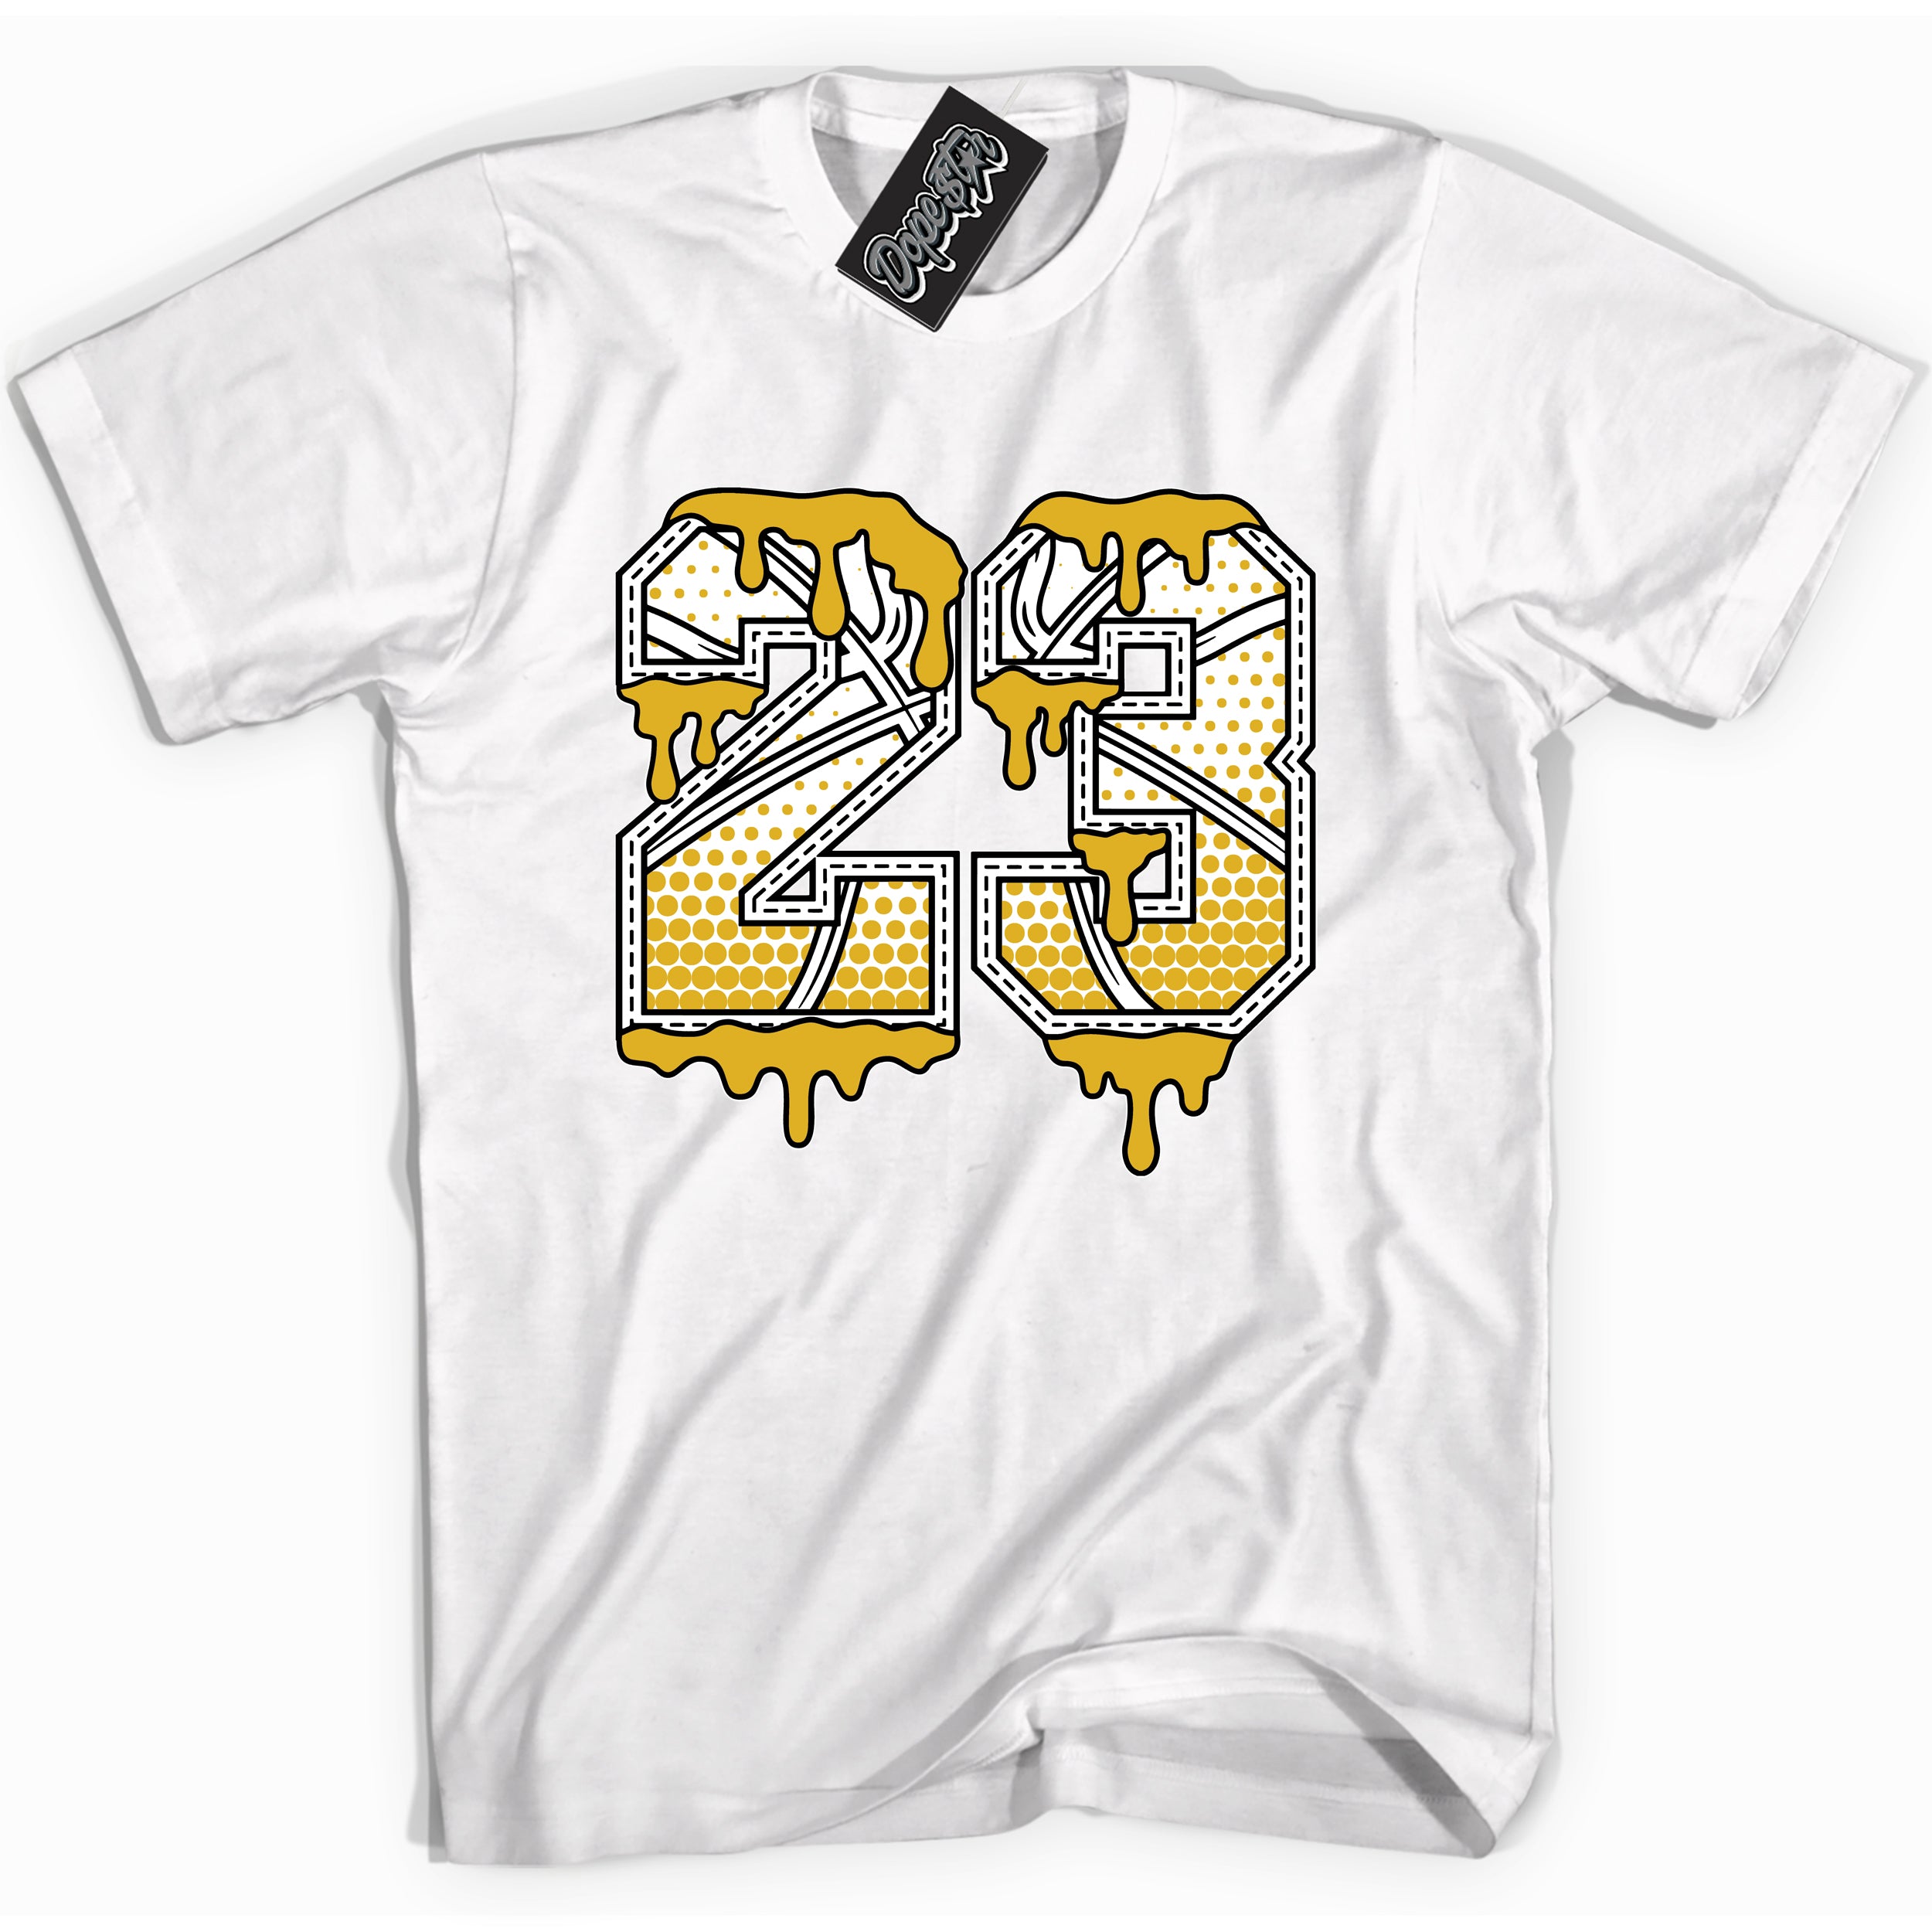 Cool White Shirt with “ 23 Ball” design that perfectly matches Yellow Ochre 6s Sneakers.